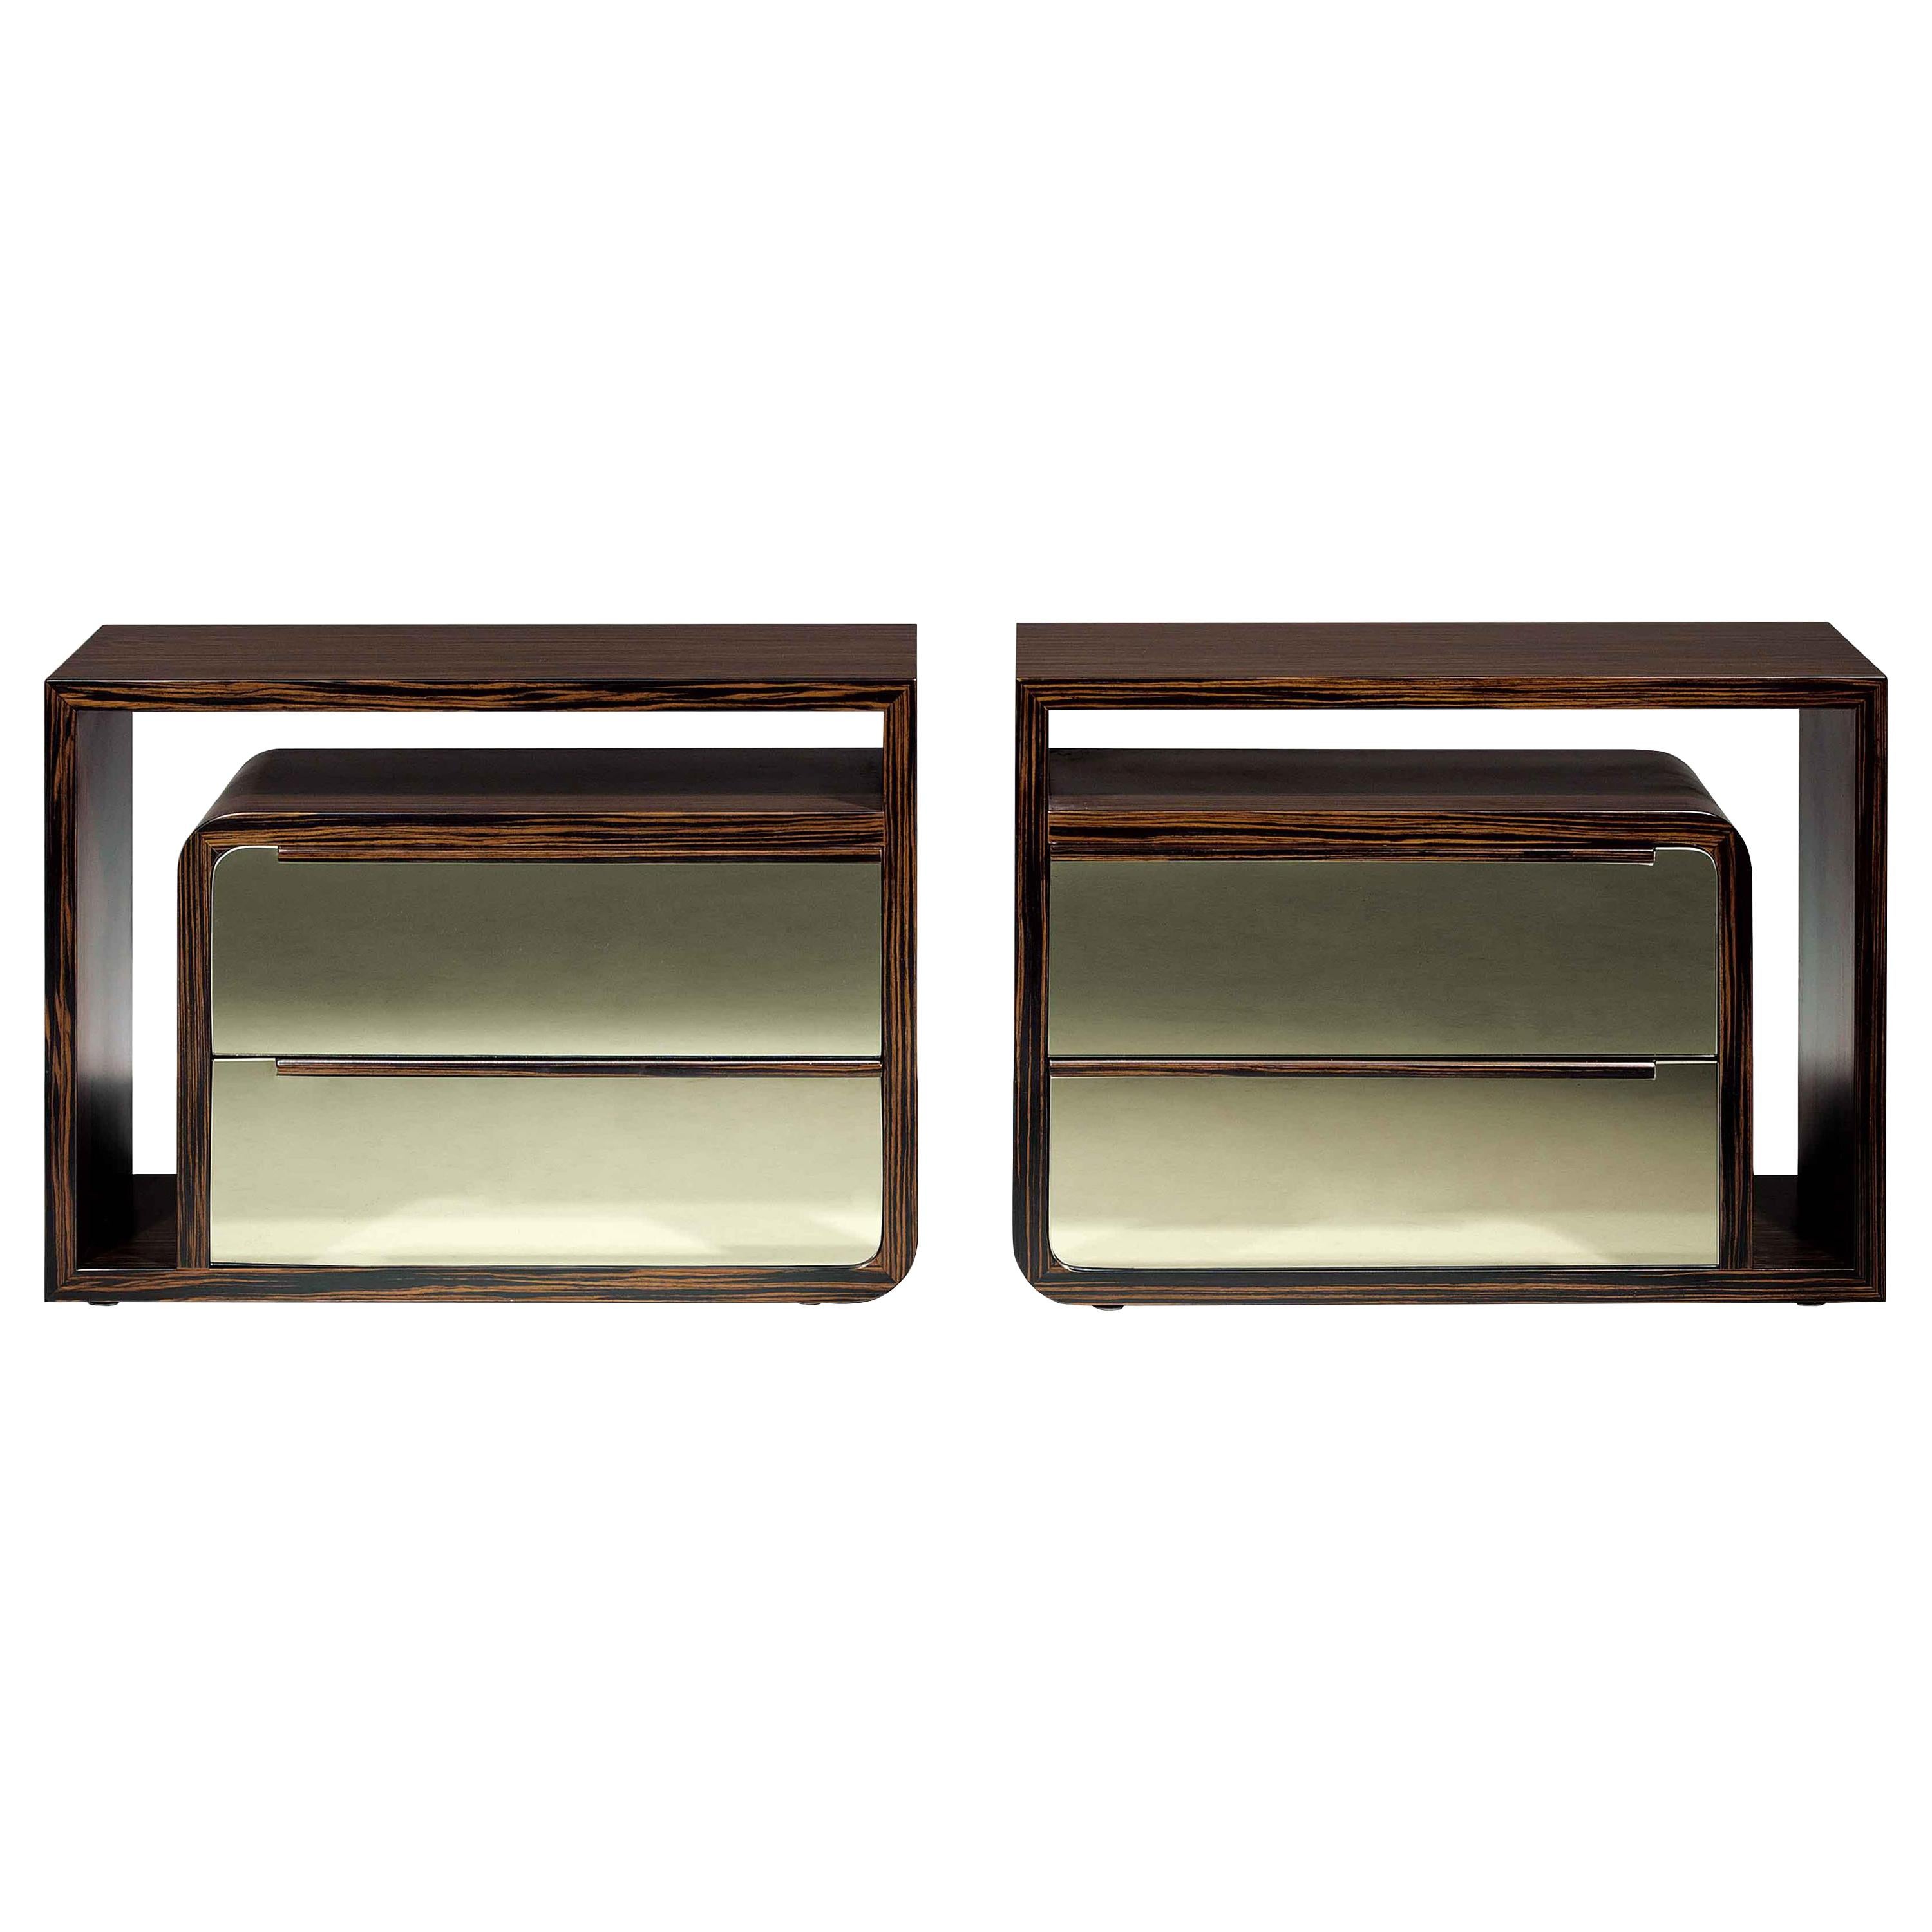 Rose Contemporary Bedside Table with Two Mirrored Drawers by Luísa Peixoto